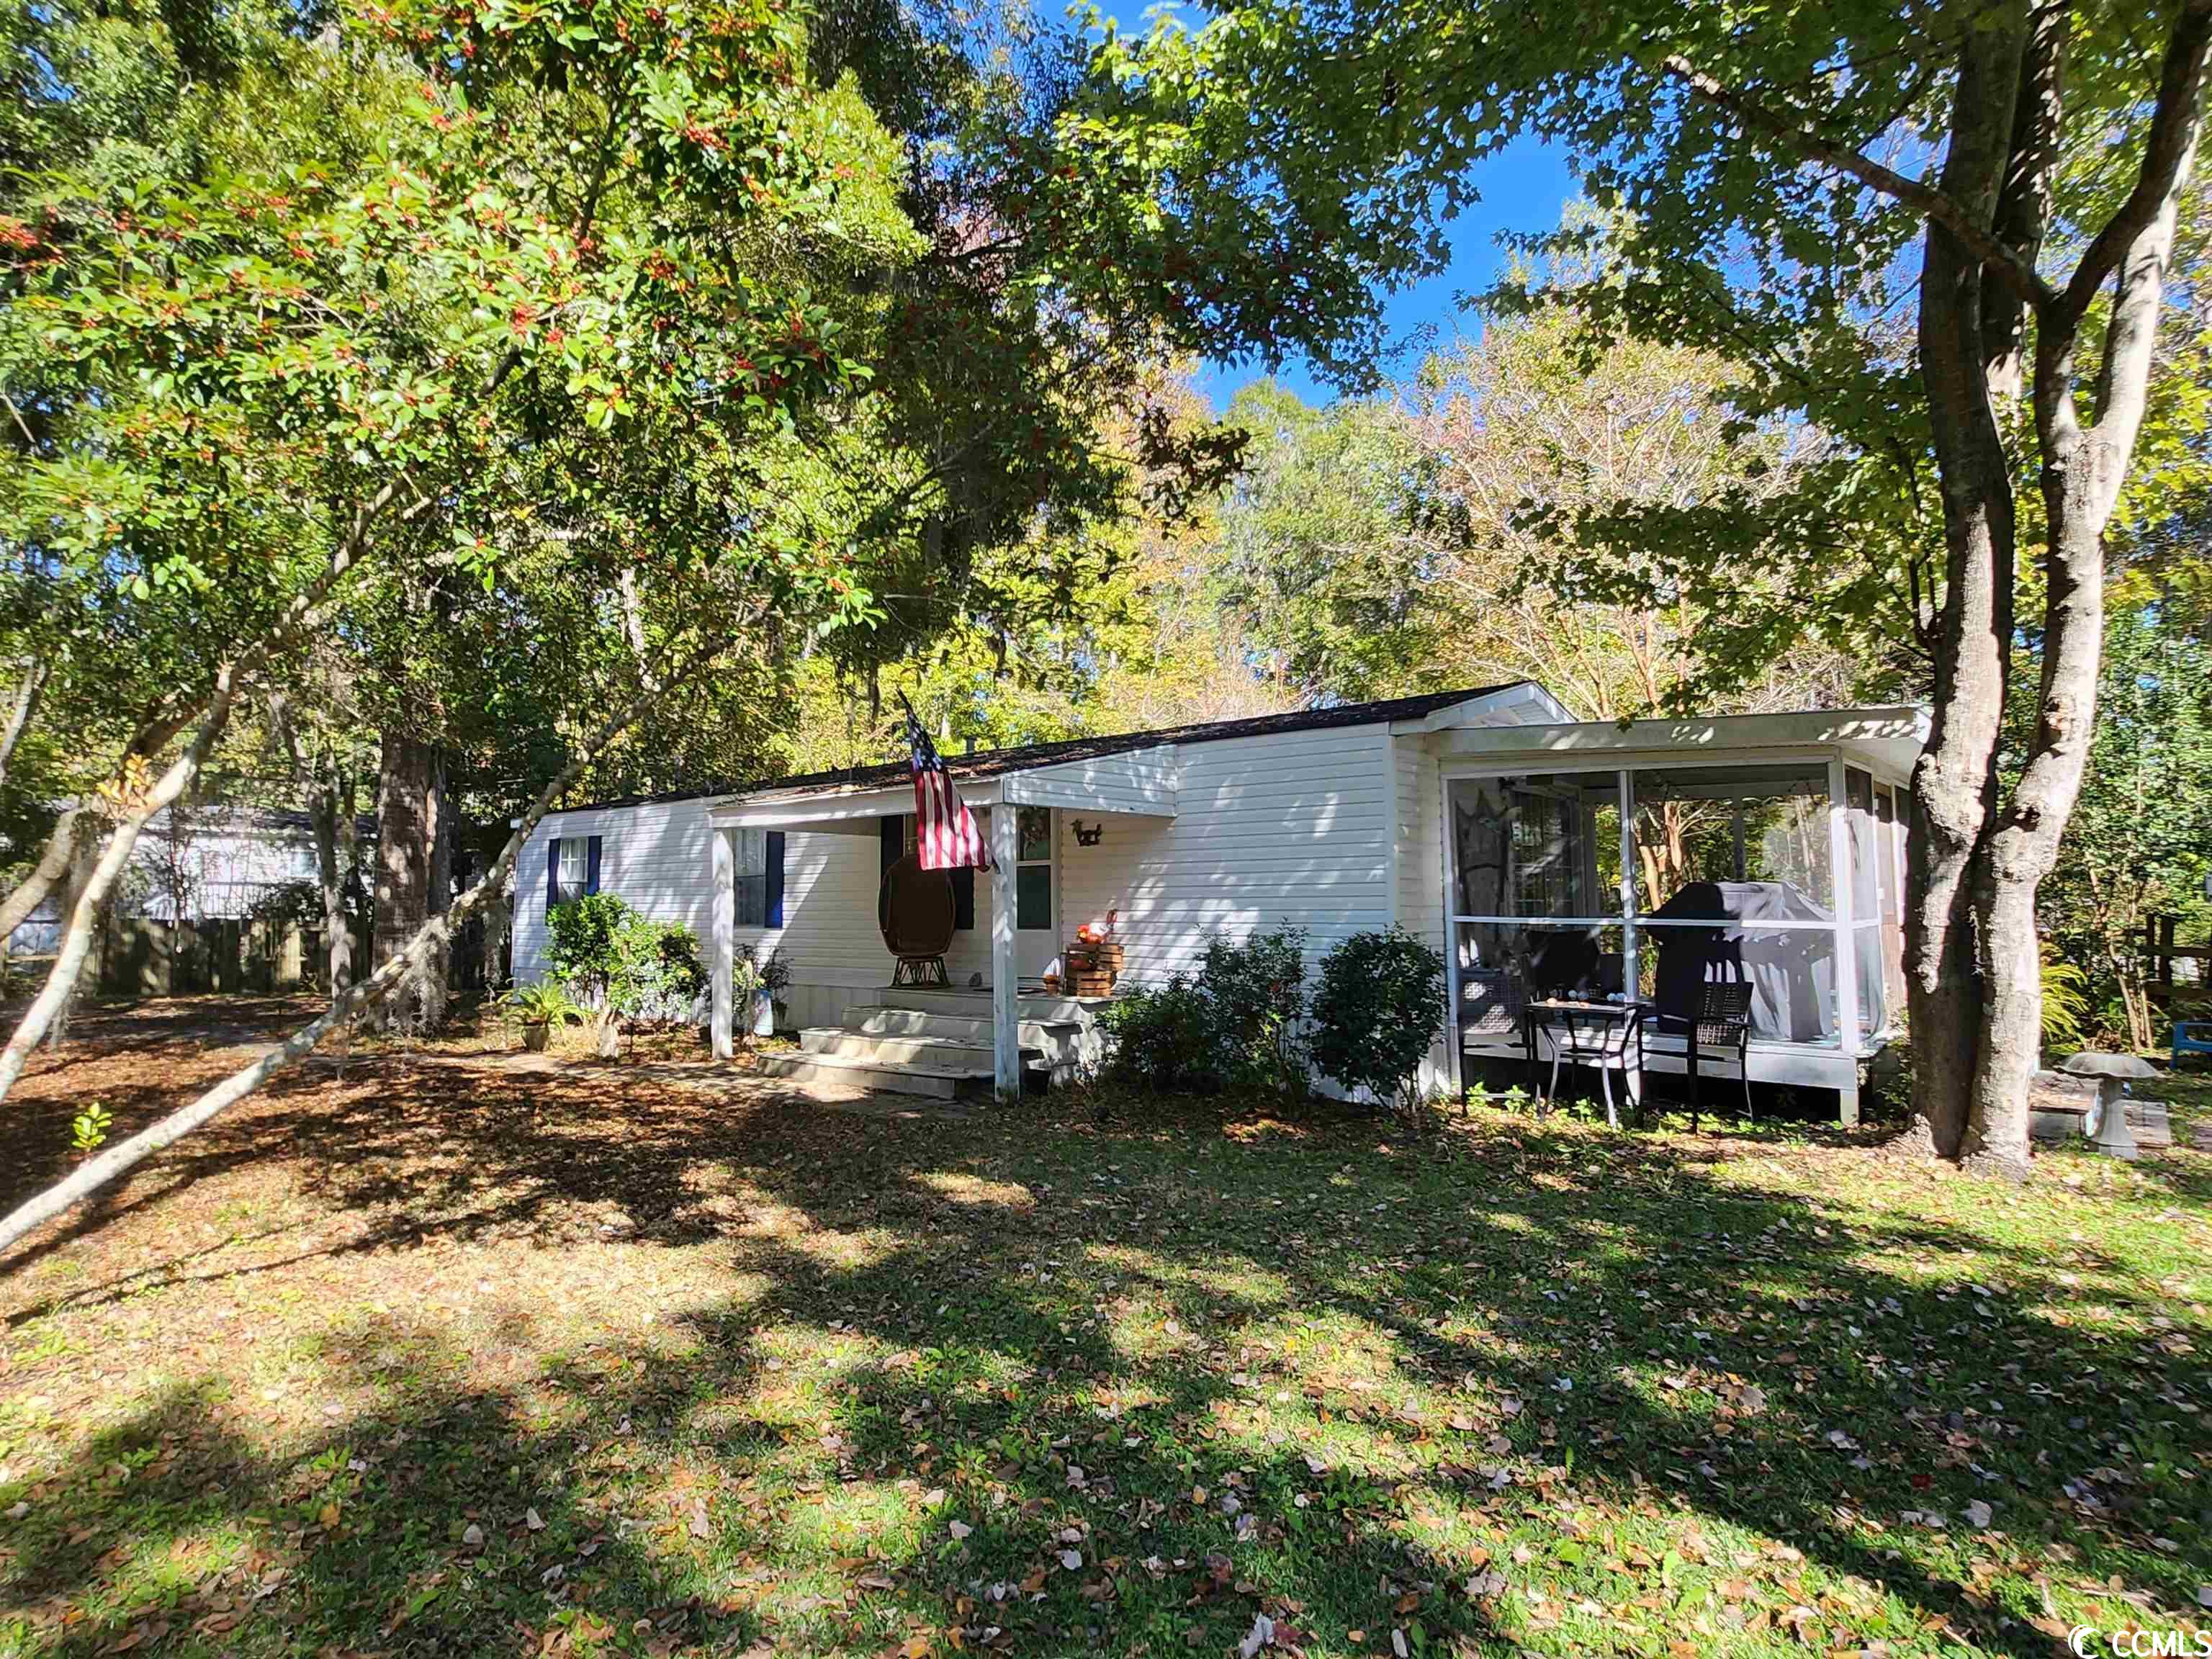 welcome home! centrally located in the heart of pawleys, this home is nestled in a quiet neighborhood on just under a half an acre with mature trees, including live oaks draped in spanish moss. relax with a book or enjoy coffee or cocktails on the 10x12 screened porch. remodeled, updated, and well-maintained! close to churches, restaurants, shoppes/boutiques, numerous golf courses, and of course the beach!  (be sure to click on the virtual tour link to "walk through" the home.)